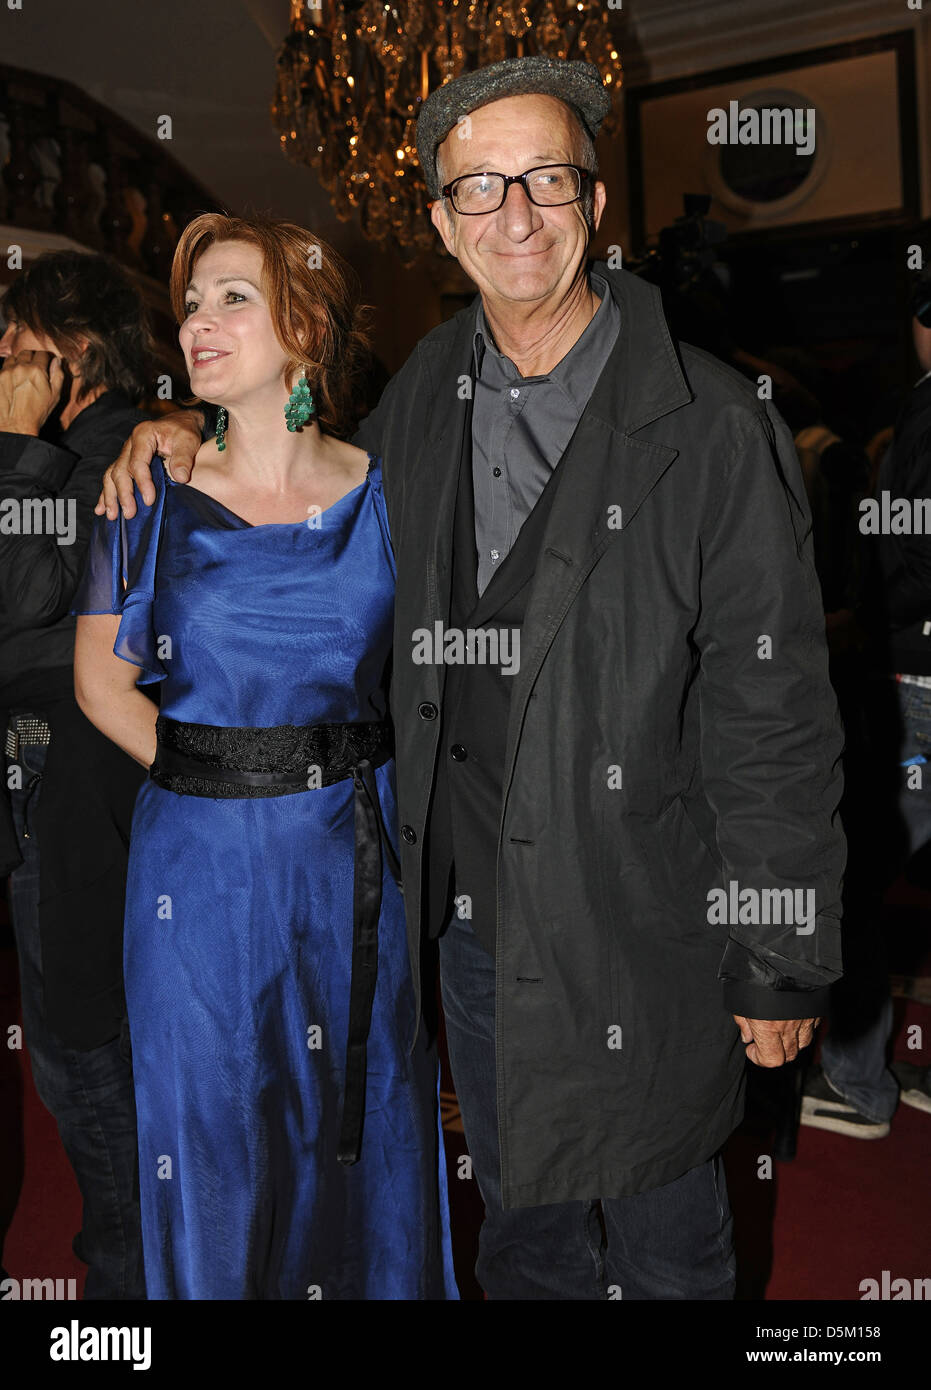 Philipp Sonntag and guest at opening gala of munich film festival. Munich, Germany - 24.06.2011. Stock Photo